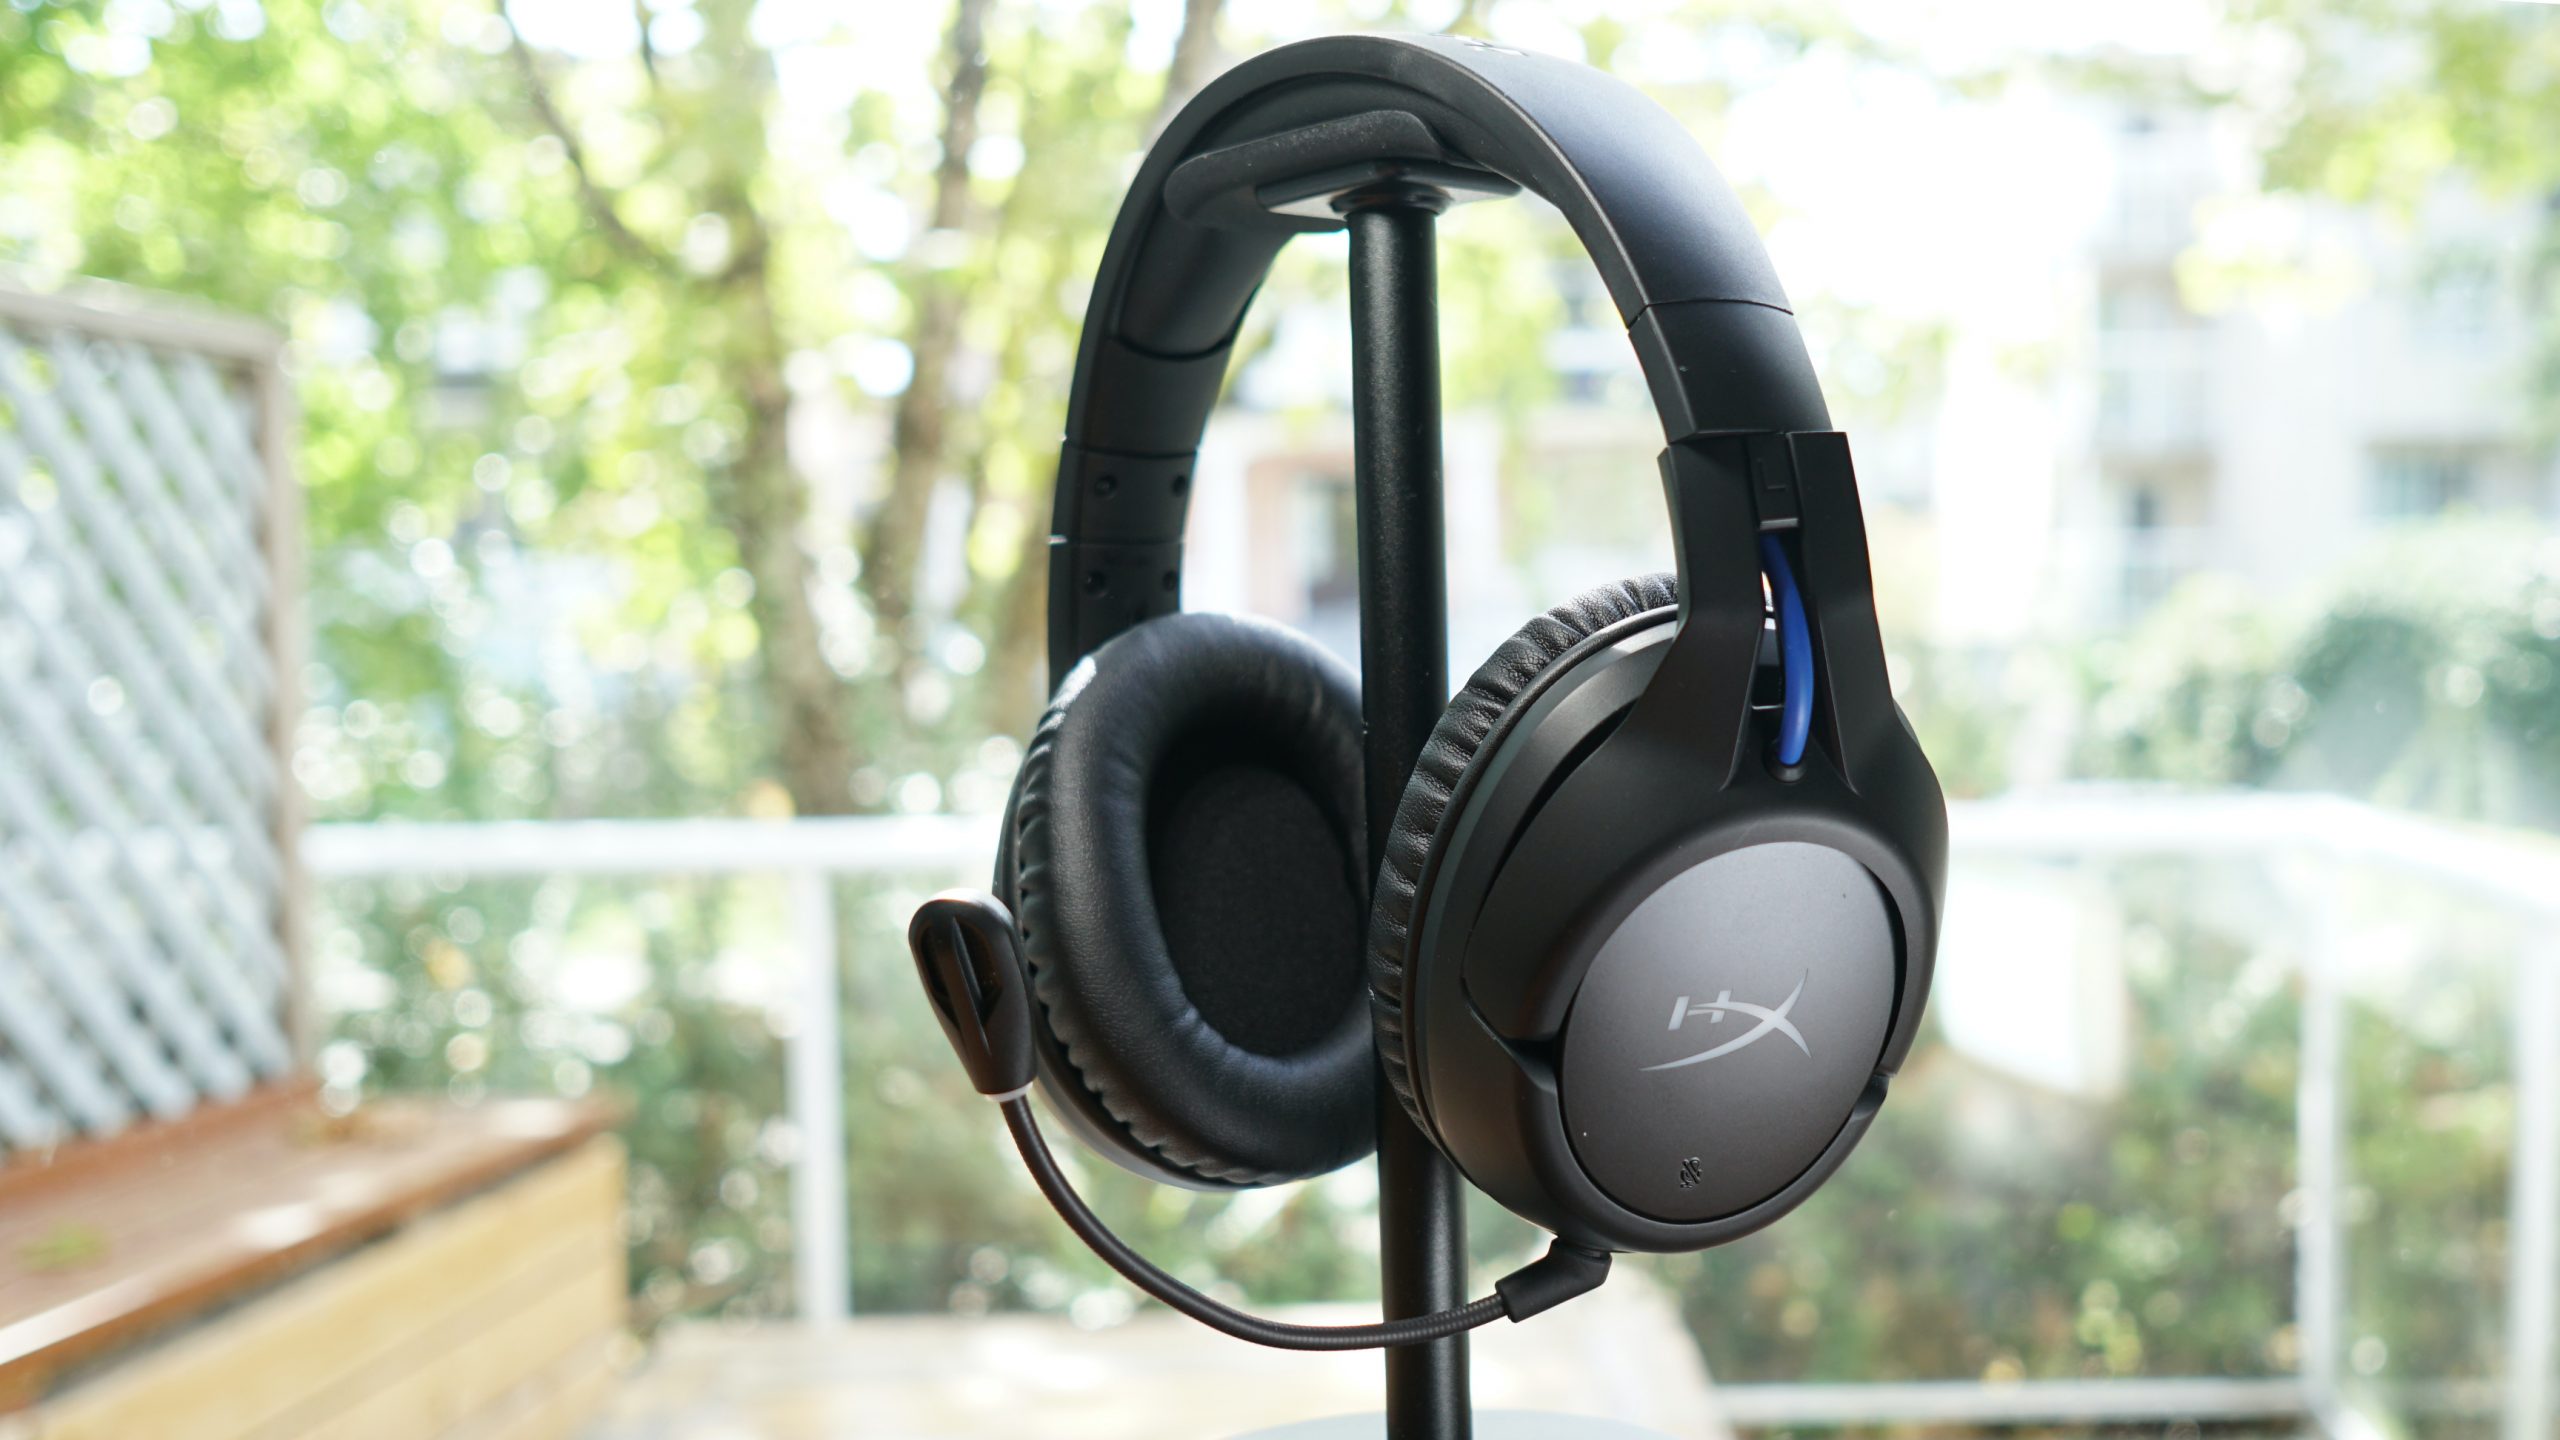 The HyperX Cloud Flight Wireless sits on a headphone stand in front of a window.